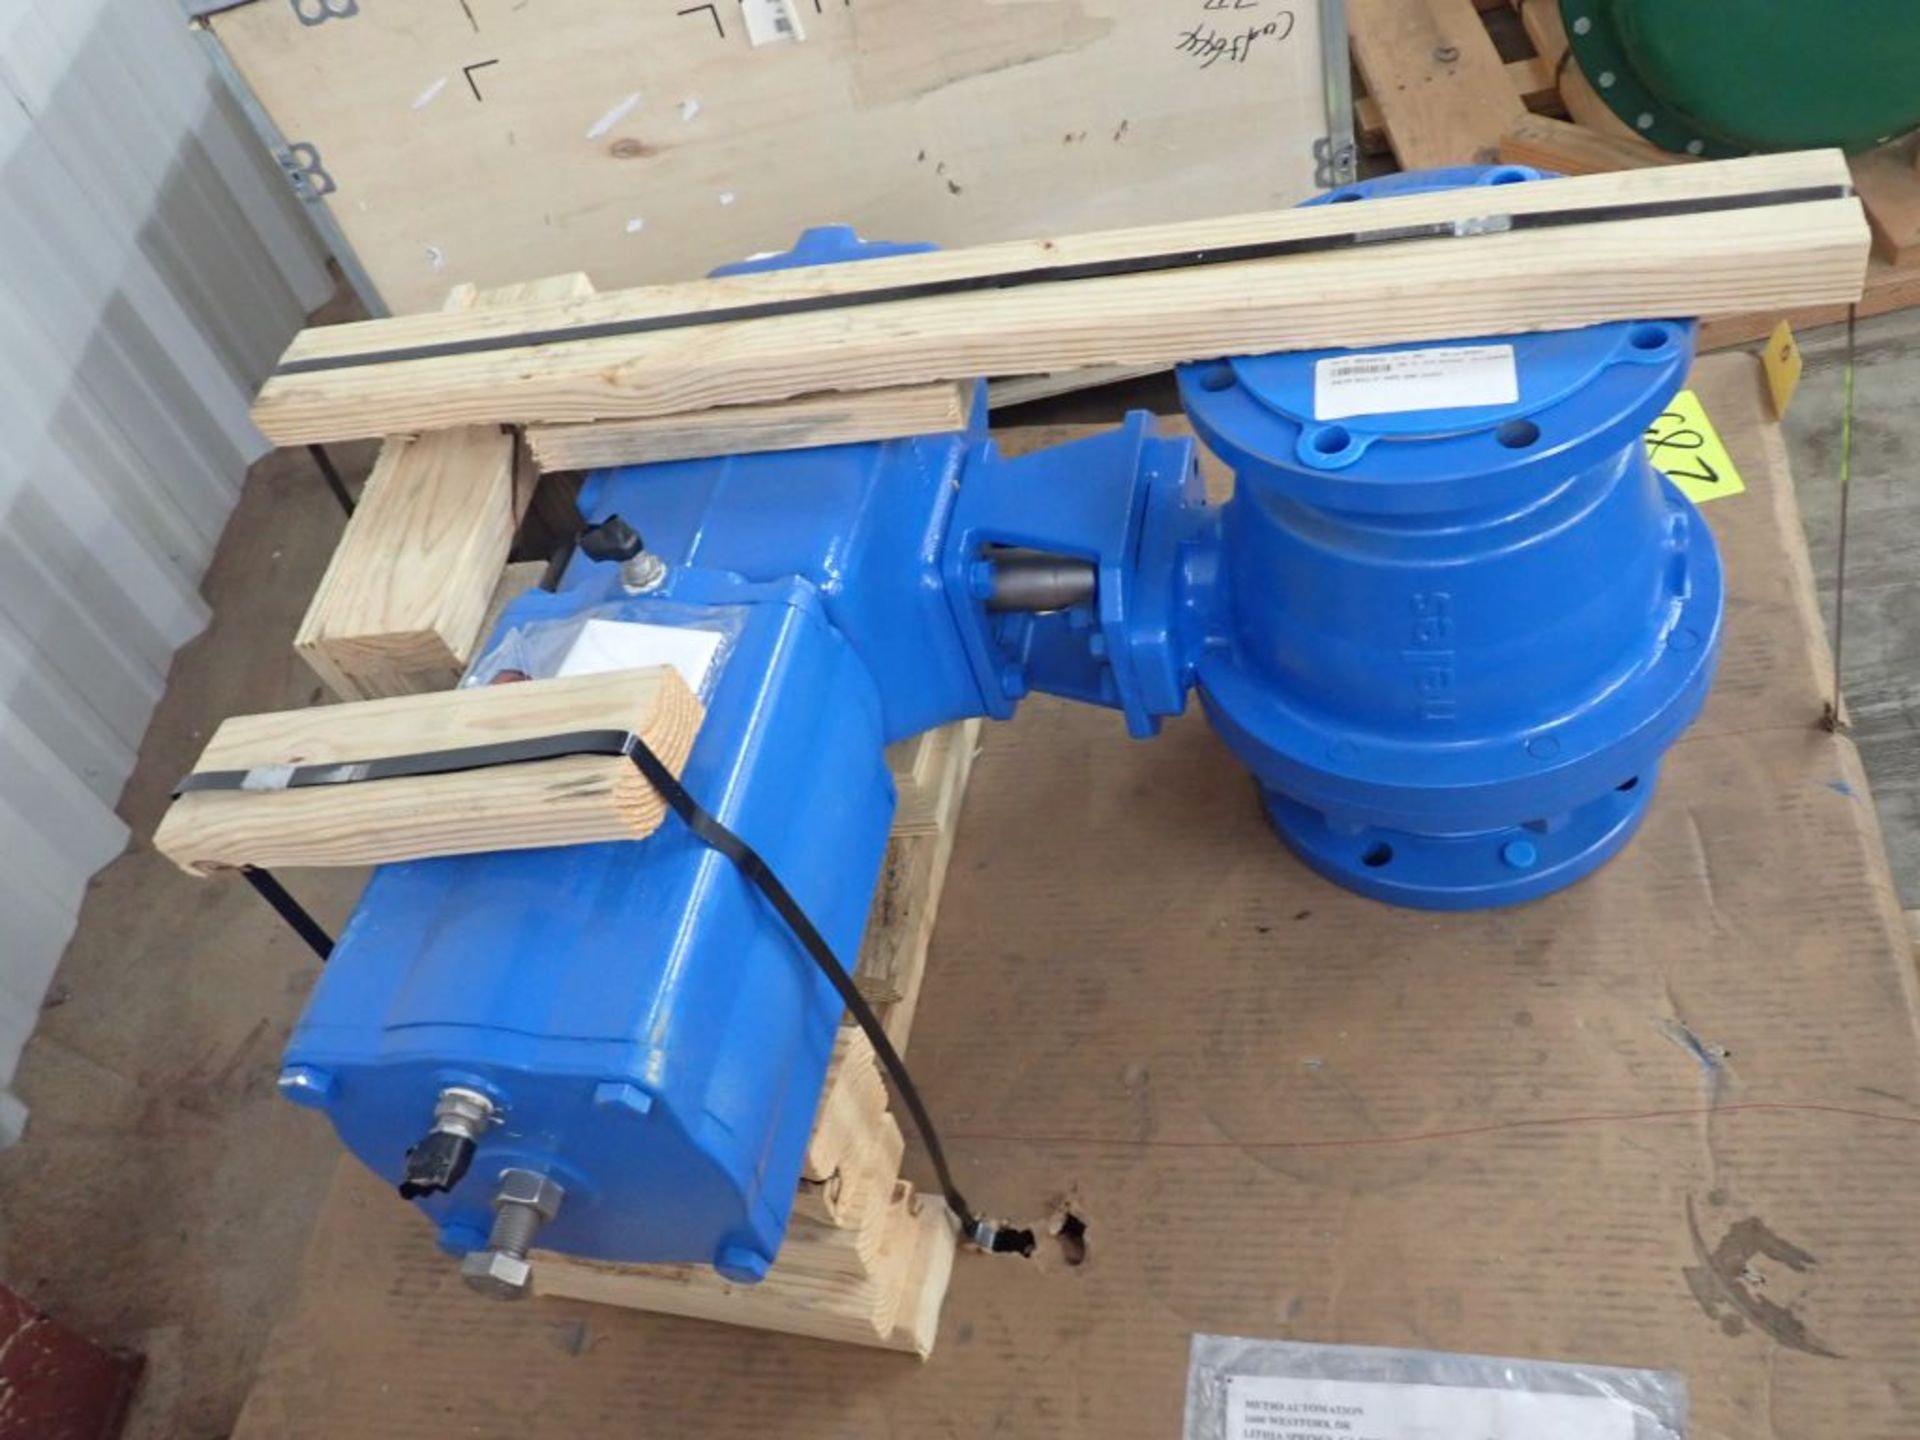 Metso Ball Valve Assembly - Bin No. 3D9D4C; Size: 6"; Tag: 215809 - Image 2 of 7